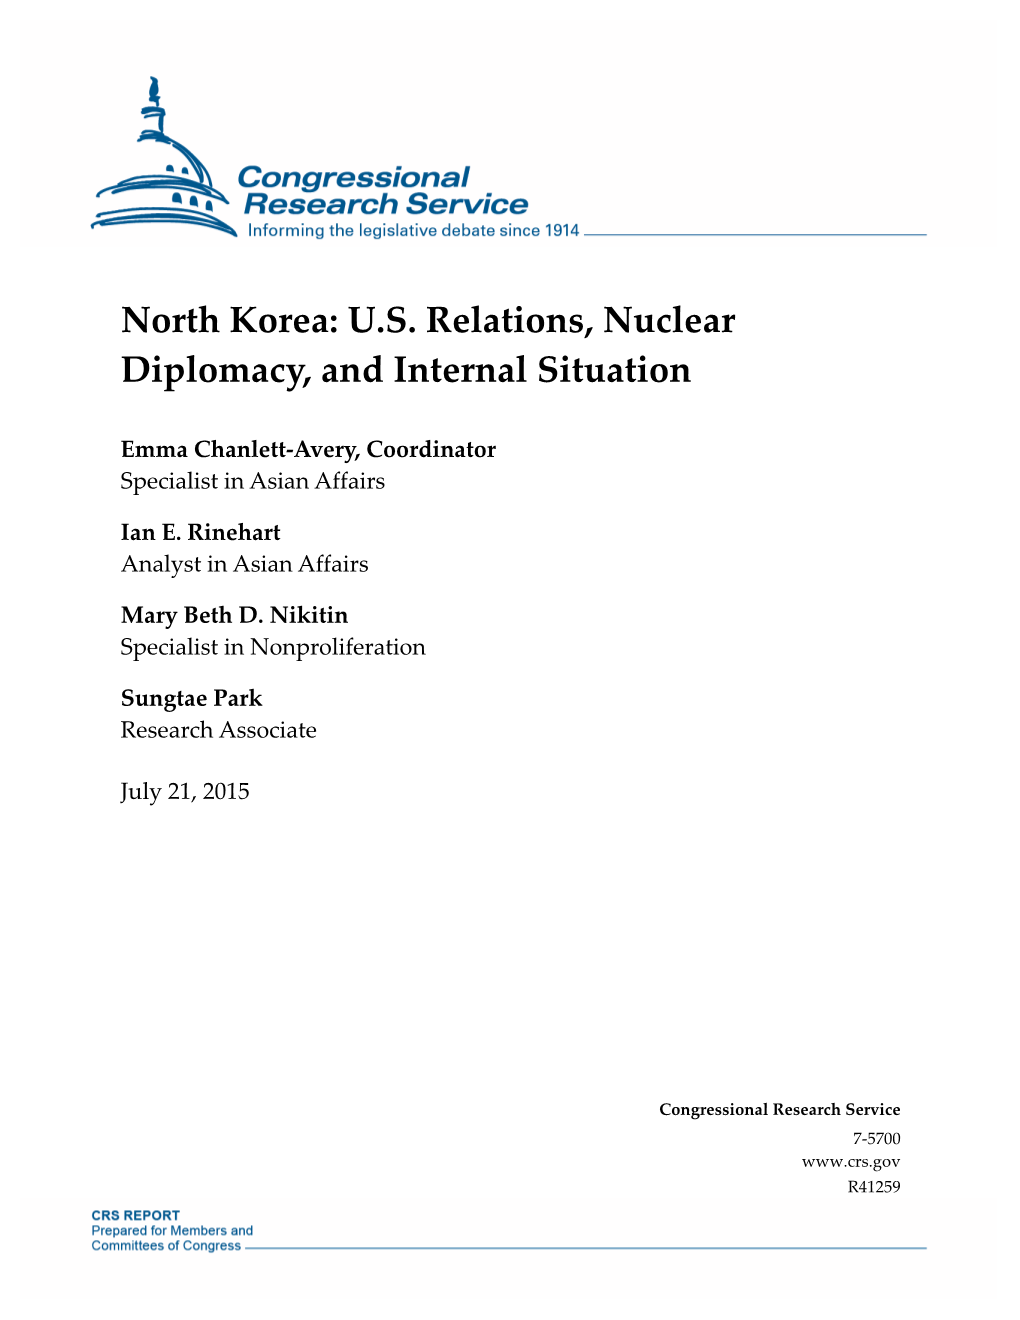 North Korea: U.S. Relations, Nuclear Diplomacy, and Internal Situation